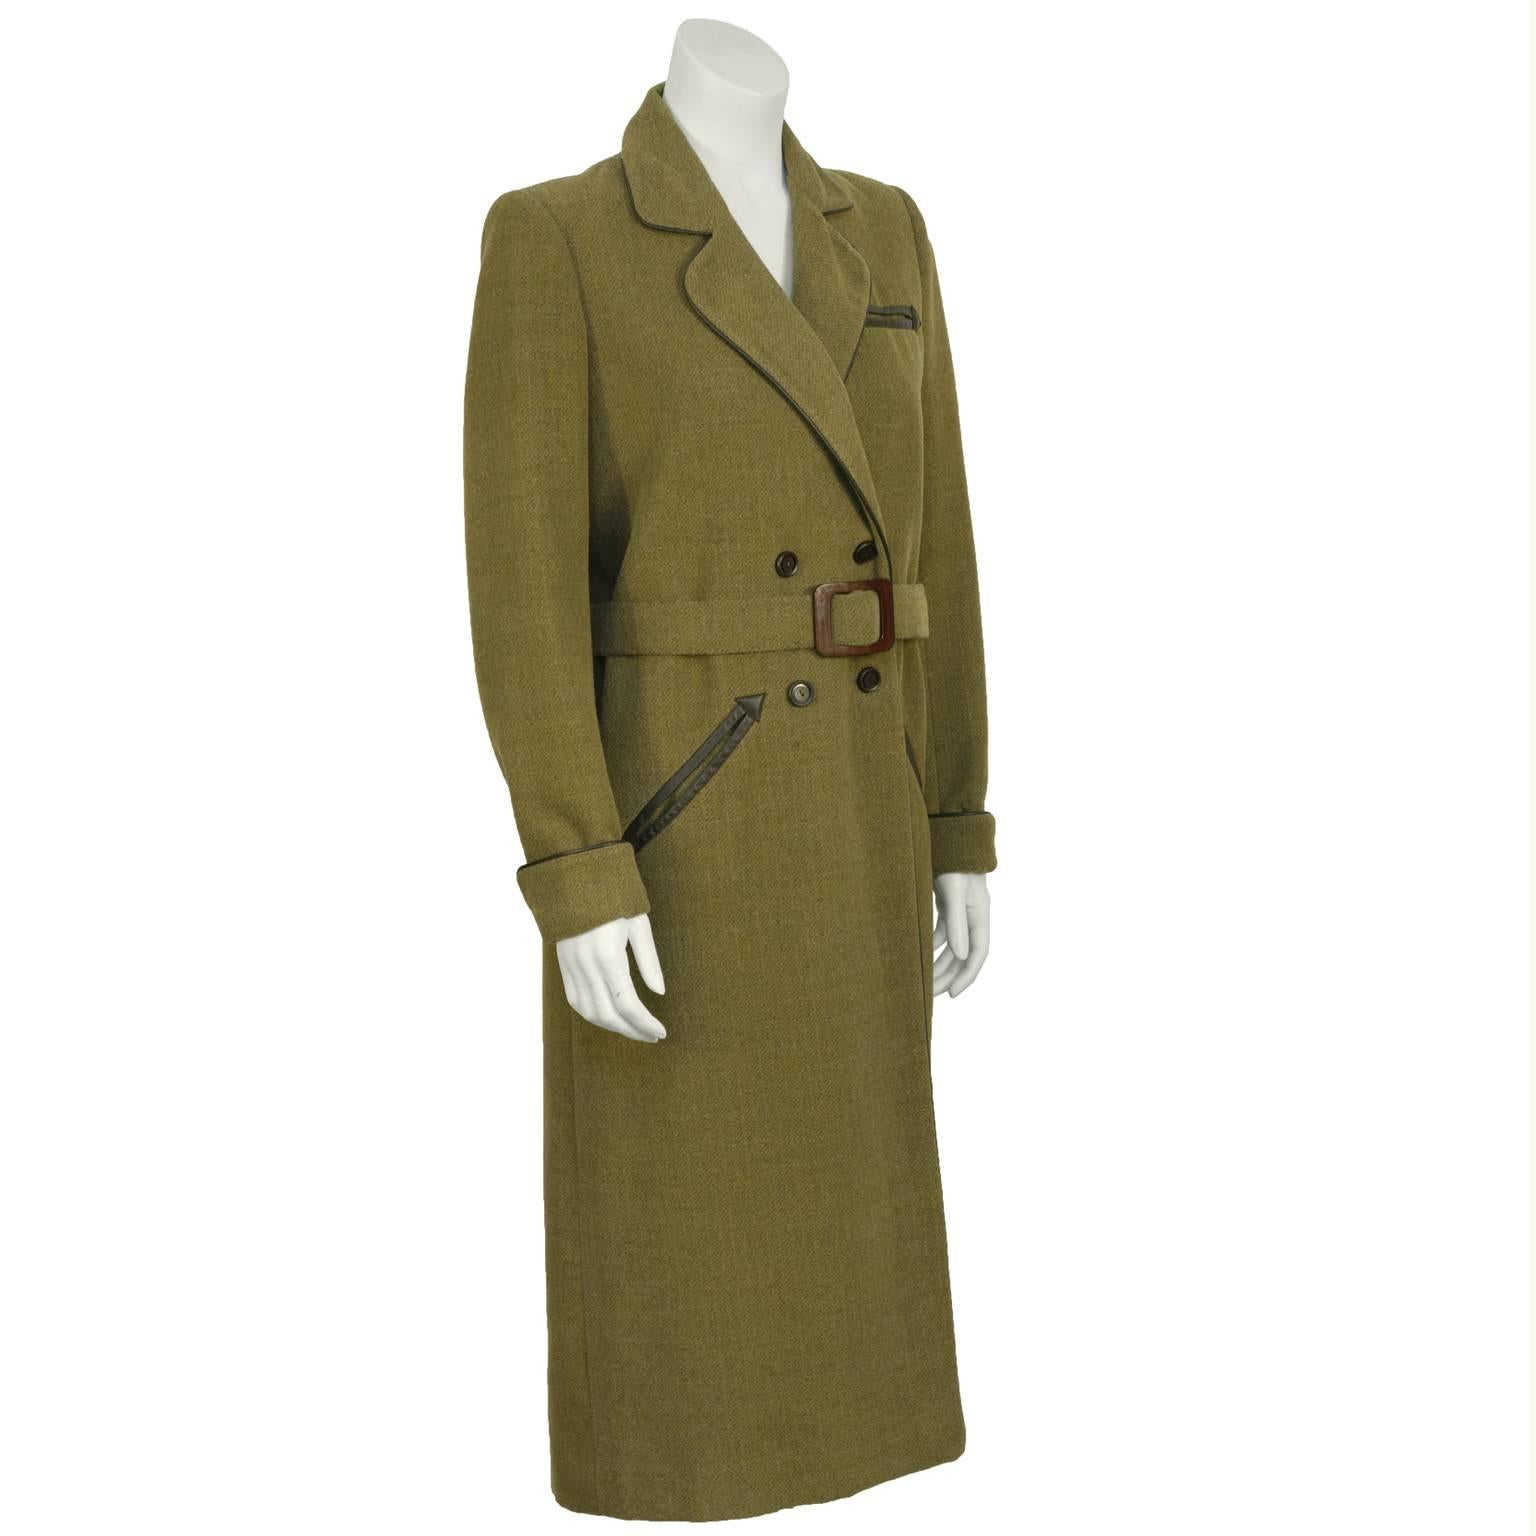 Jean Louis Scherrer double breasted belted army green wool maxi coat from the 1960's. The coat features a notched collar with leather piping. The piping detail continues on the cuffs, the edges and on the diagonal welt pockets at the hips and breast